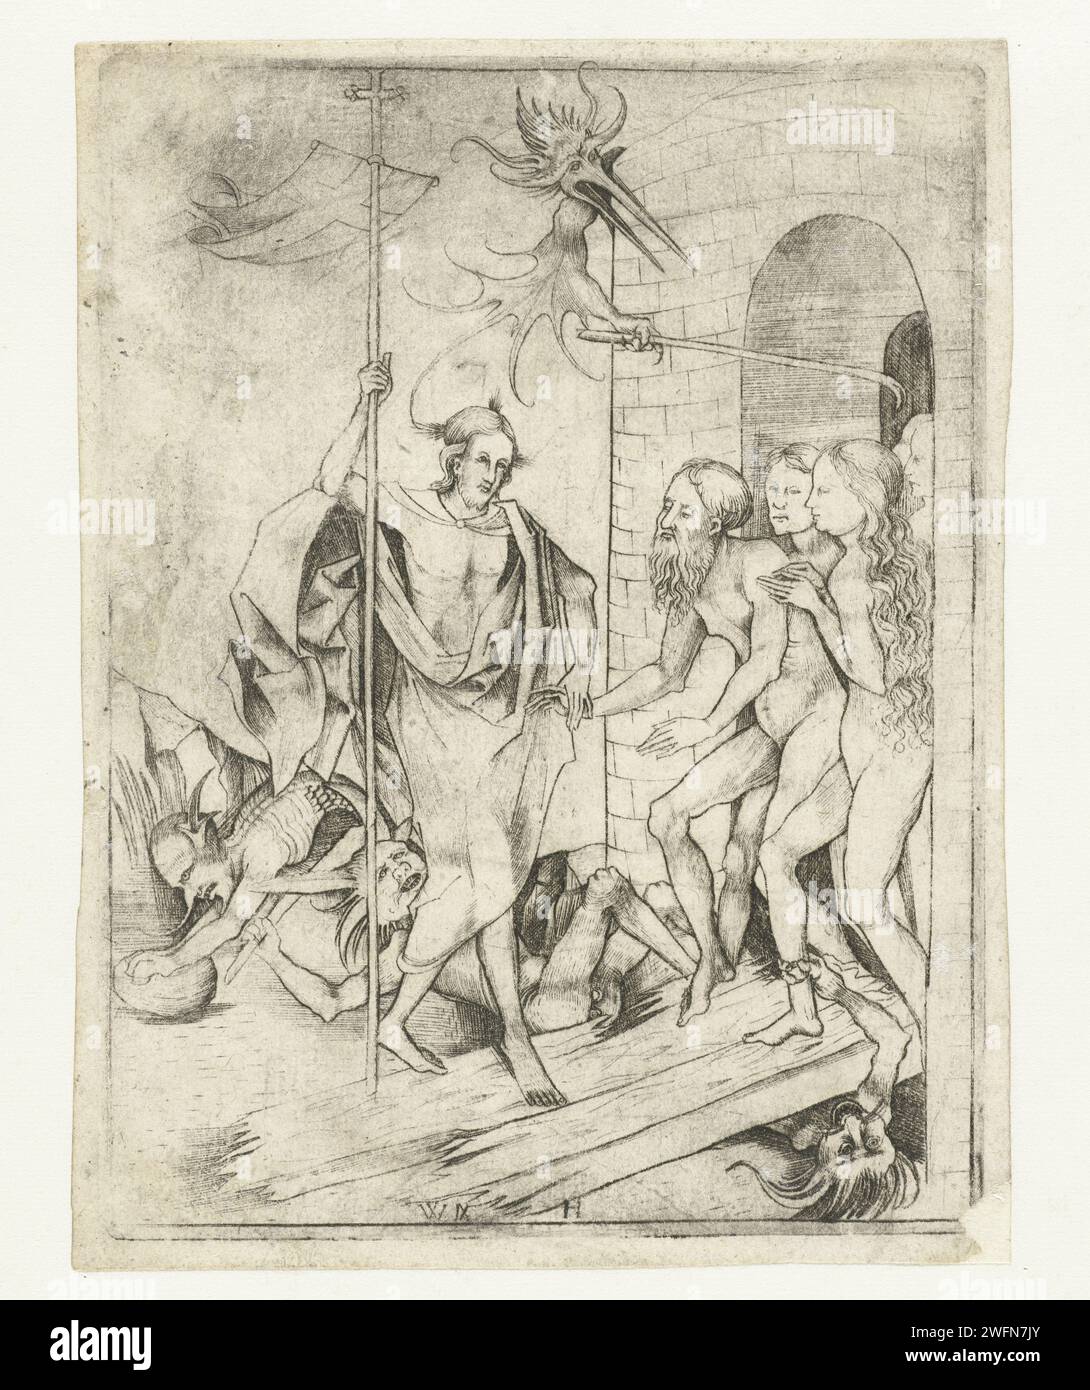 The descent into the Borgste, monogramemist Wah, after monogram AG (15th century), 1475 - 1491 print Christ, a staff with a vane in hand, frees souls from a dungeon. Devilish being try to hinder Christ, but without success. This print is part of a series of prints with scenes from the suffering story, copies to prints of the monogram miss AG. Print Maker: Germanyprint Maker: Bocholt (Germany) paper engraving Christ leaving hell: he liberates patriarchs, prophets, kings and other persons from hell, among them Adam, Eve, Moses, David, and John the Baptist Stock Photo